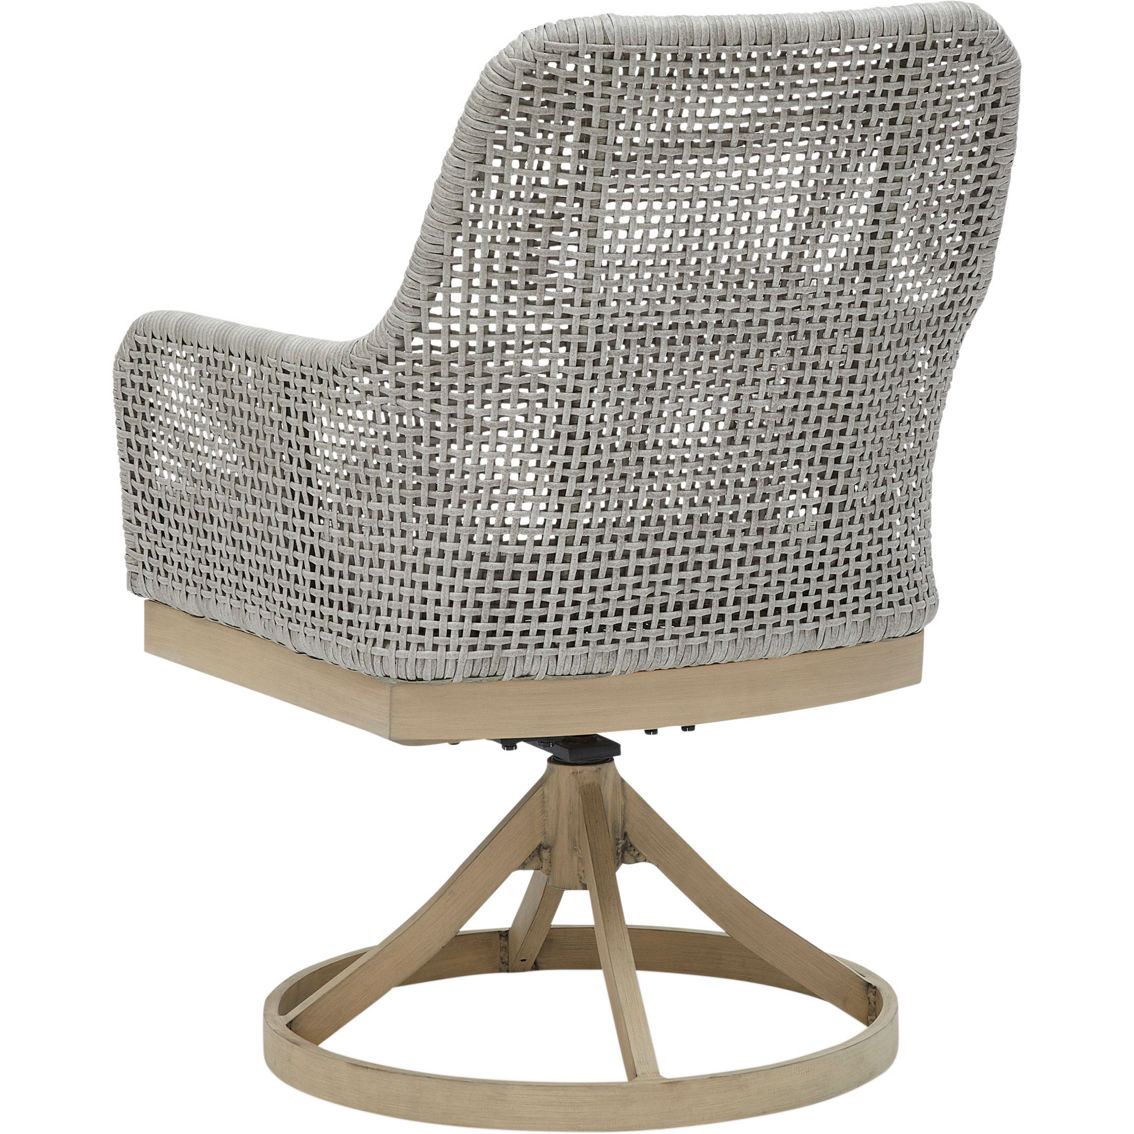 Signature Design by Ashley Seton Creek Outdoor Swivel Dining Chair 2 pk. - Image 2 of 7